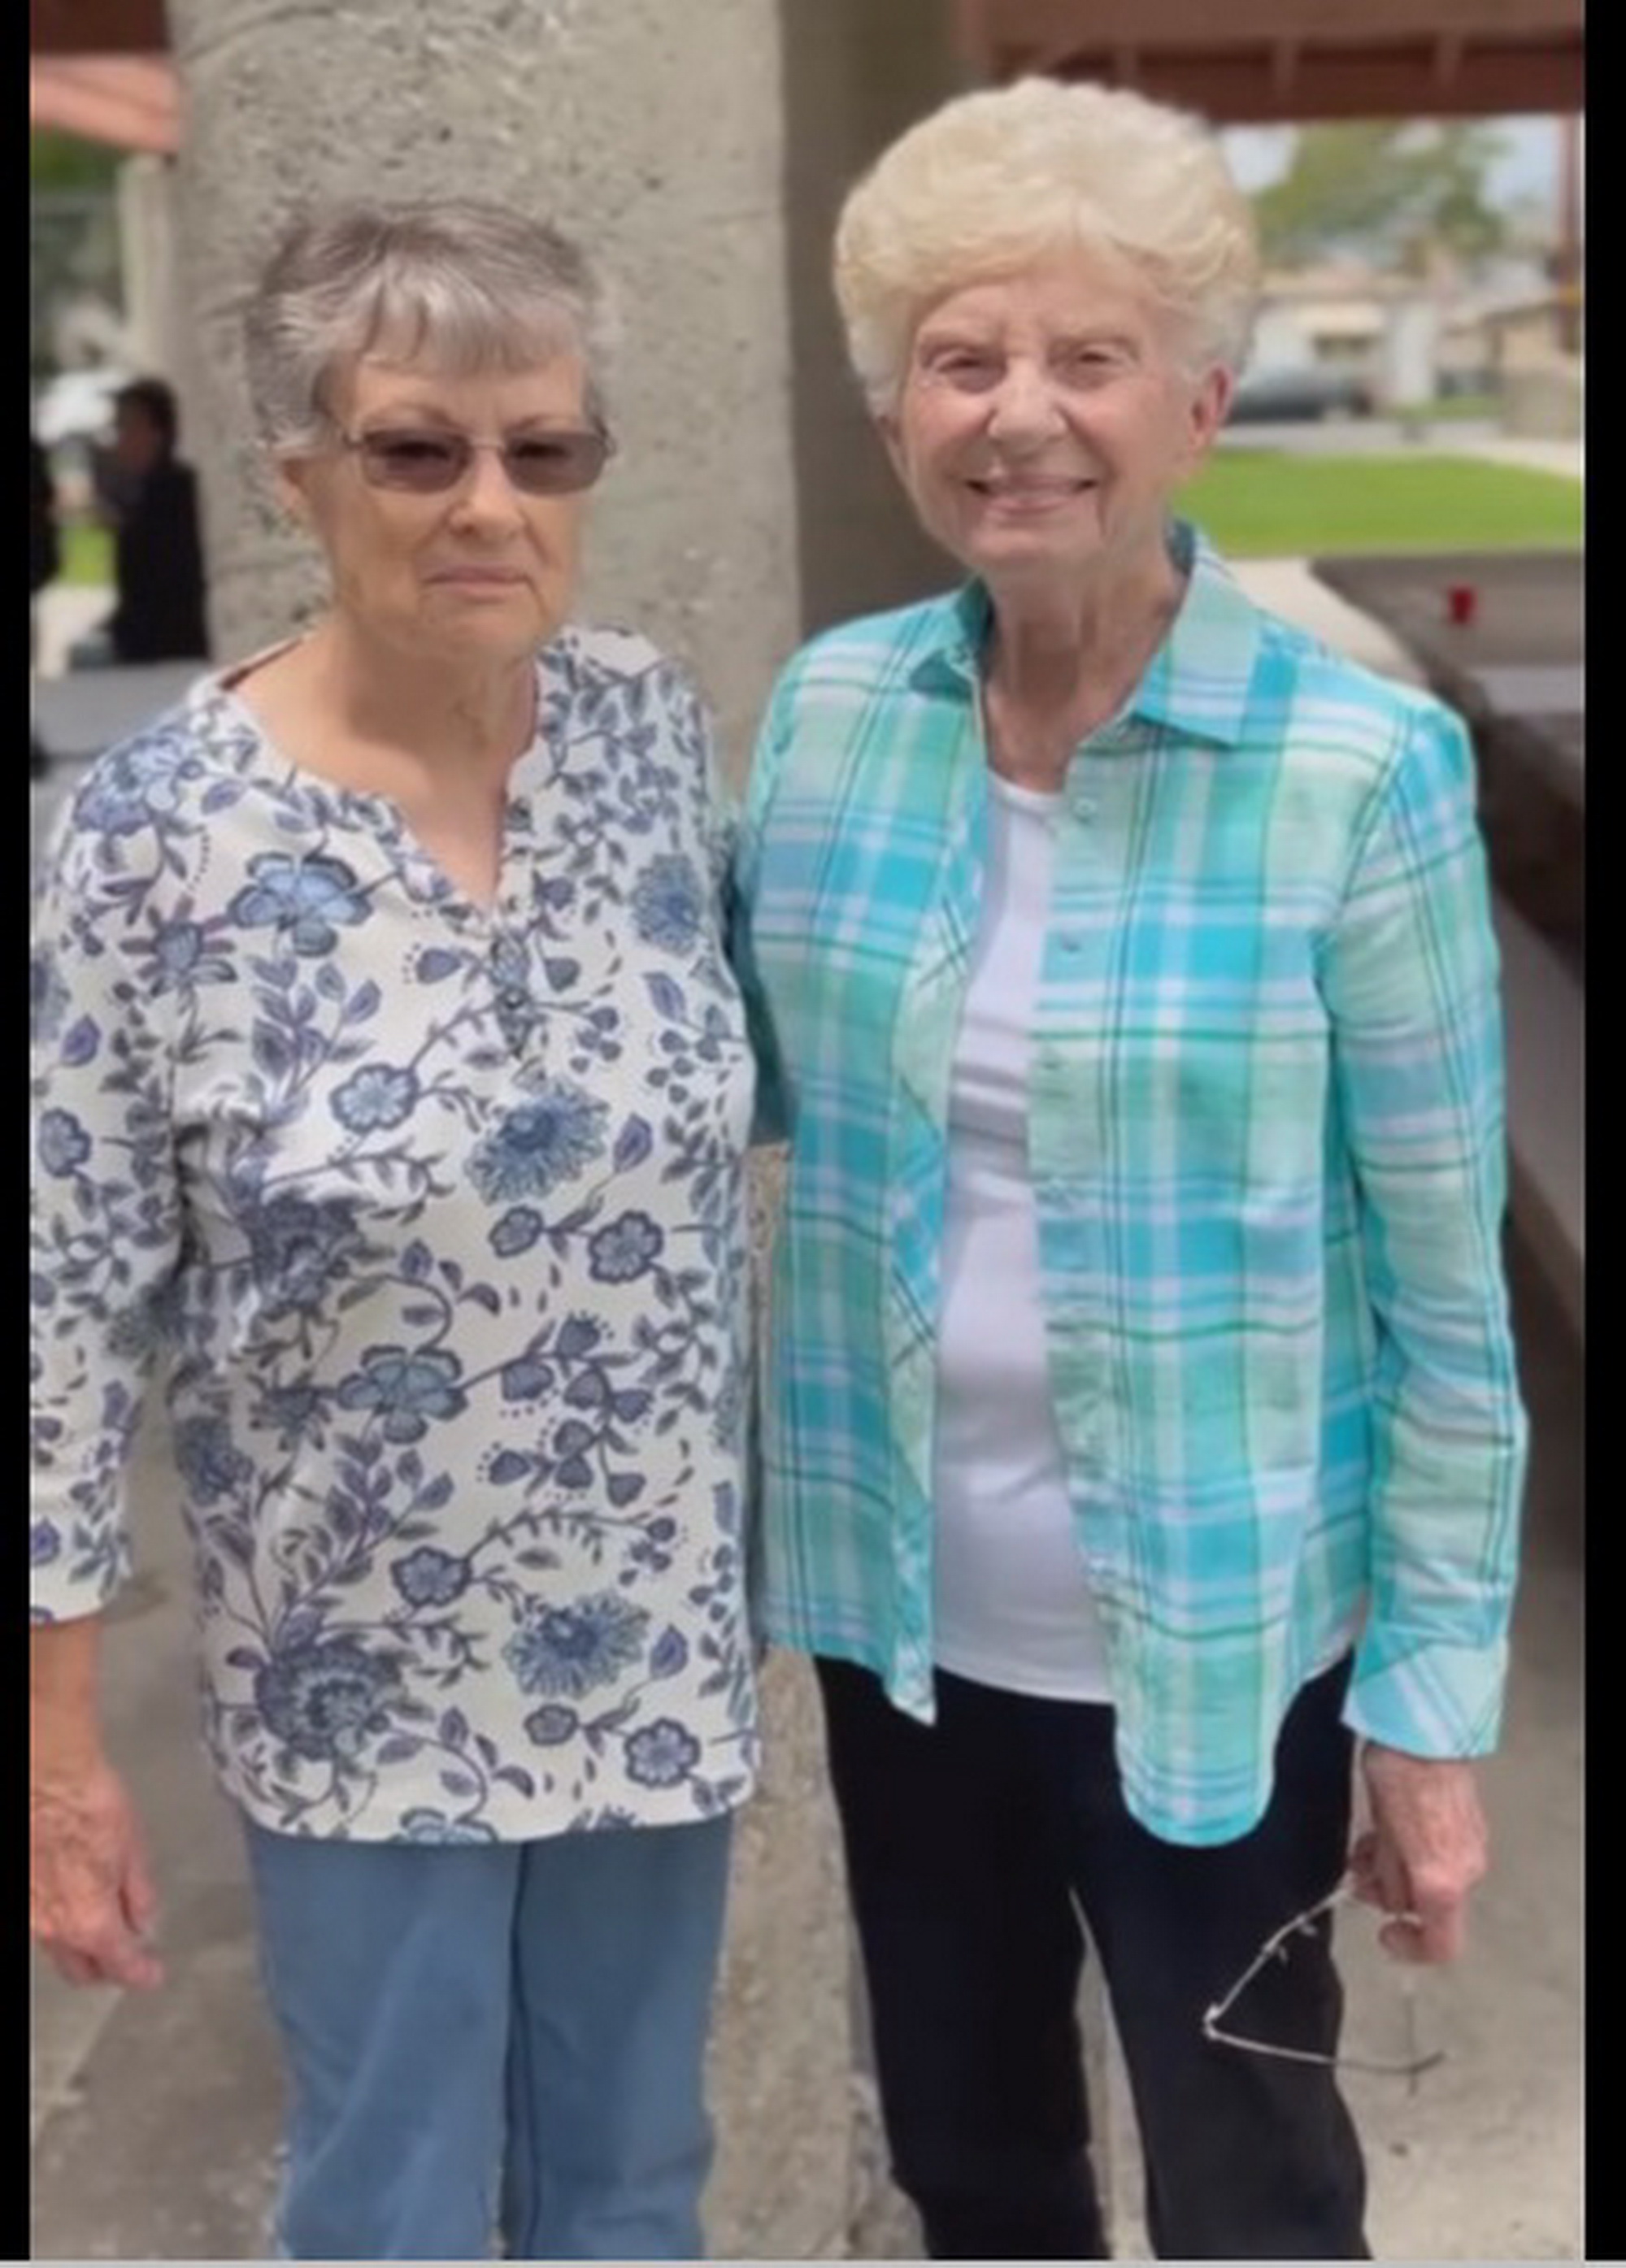 23-06-18-Class of 56 Reunion at CHS-Maryna and Mary_No_02_resize